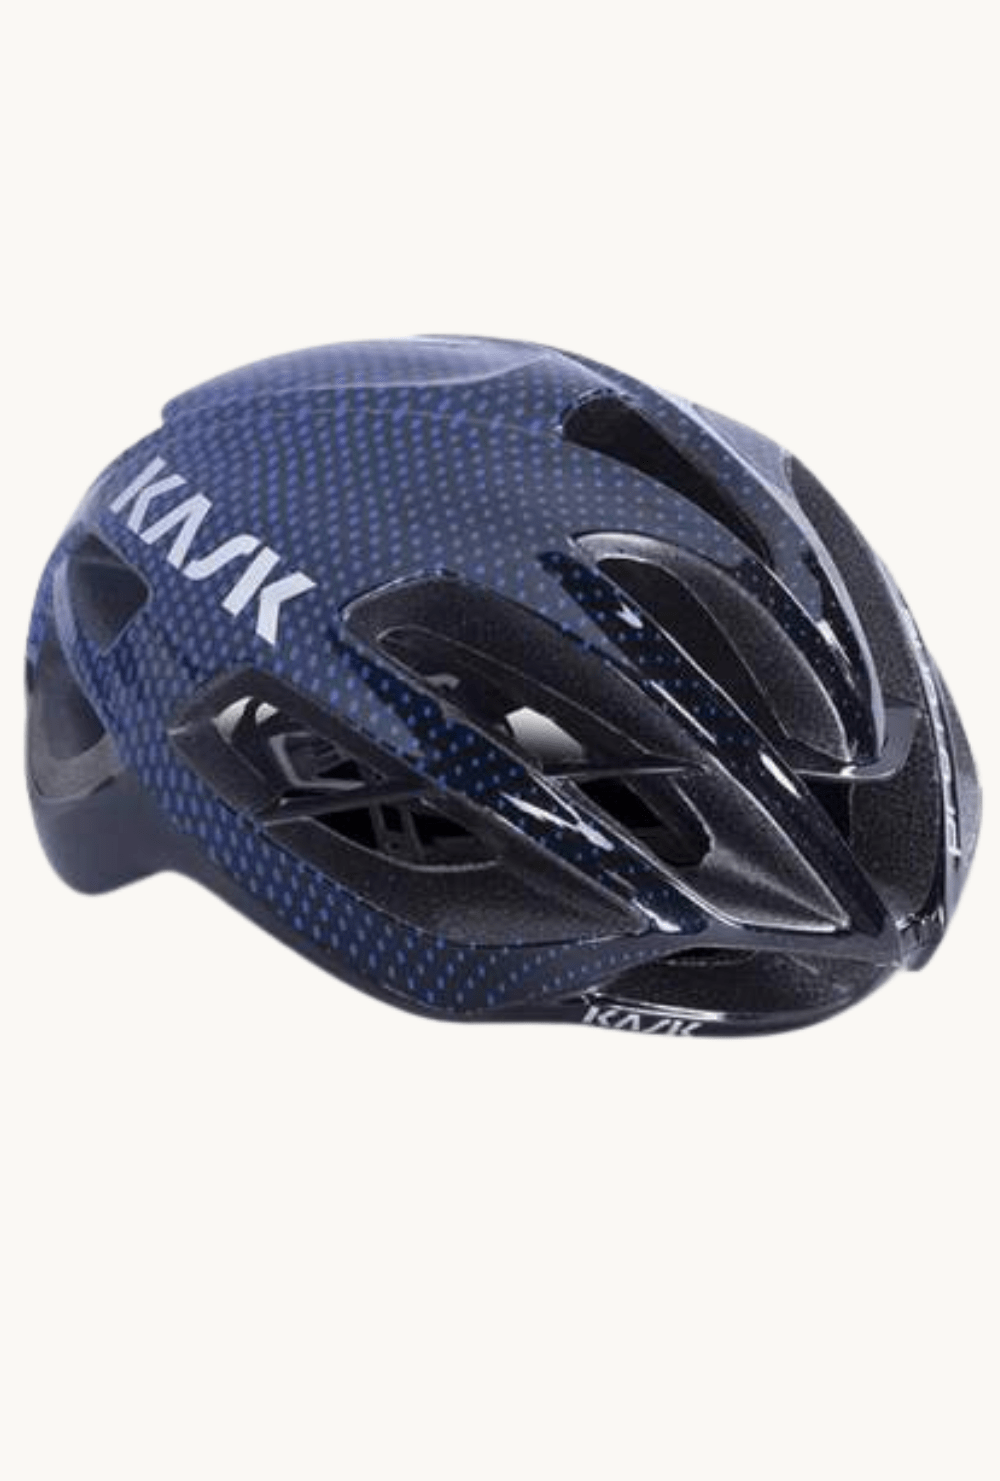 Helmet - Kask Protone Dotted Bluelarge (59-62cm) / Dotted Blue